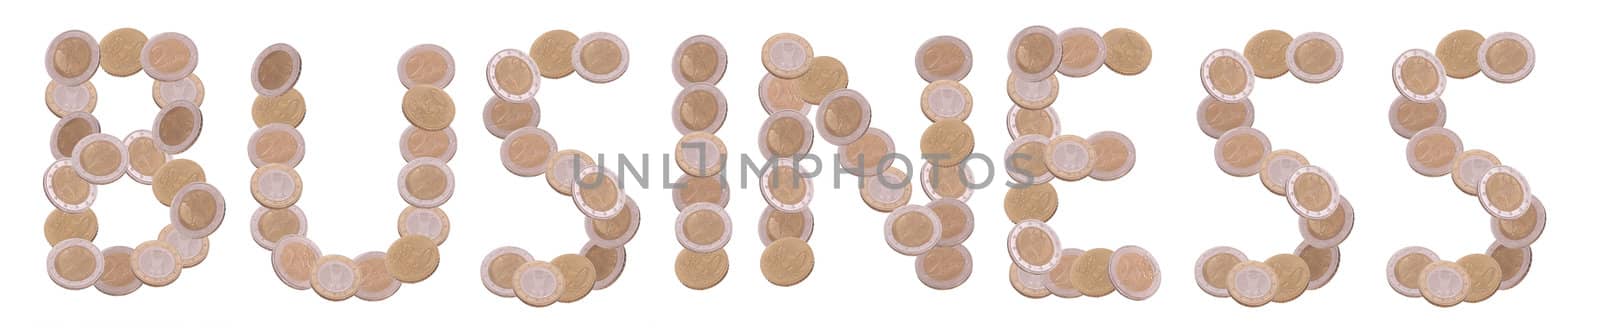 business - written with coins on white background